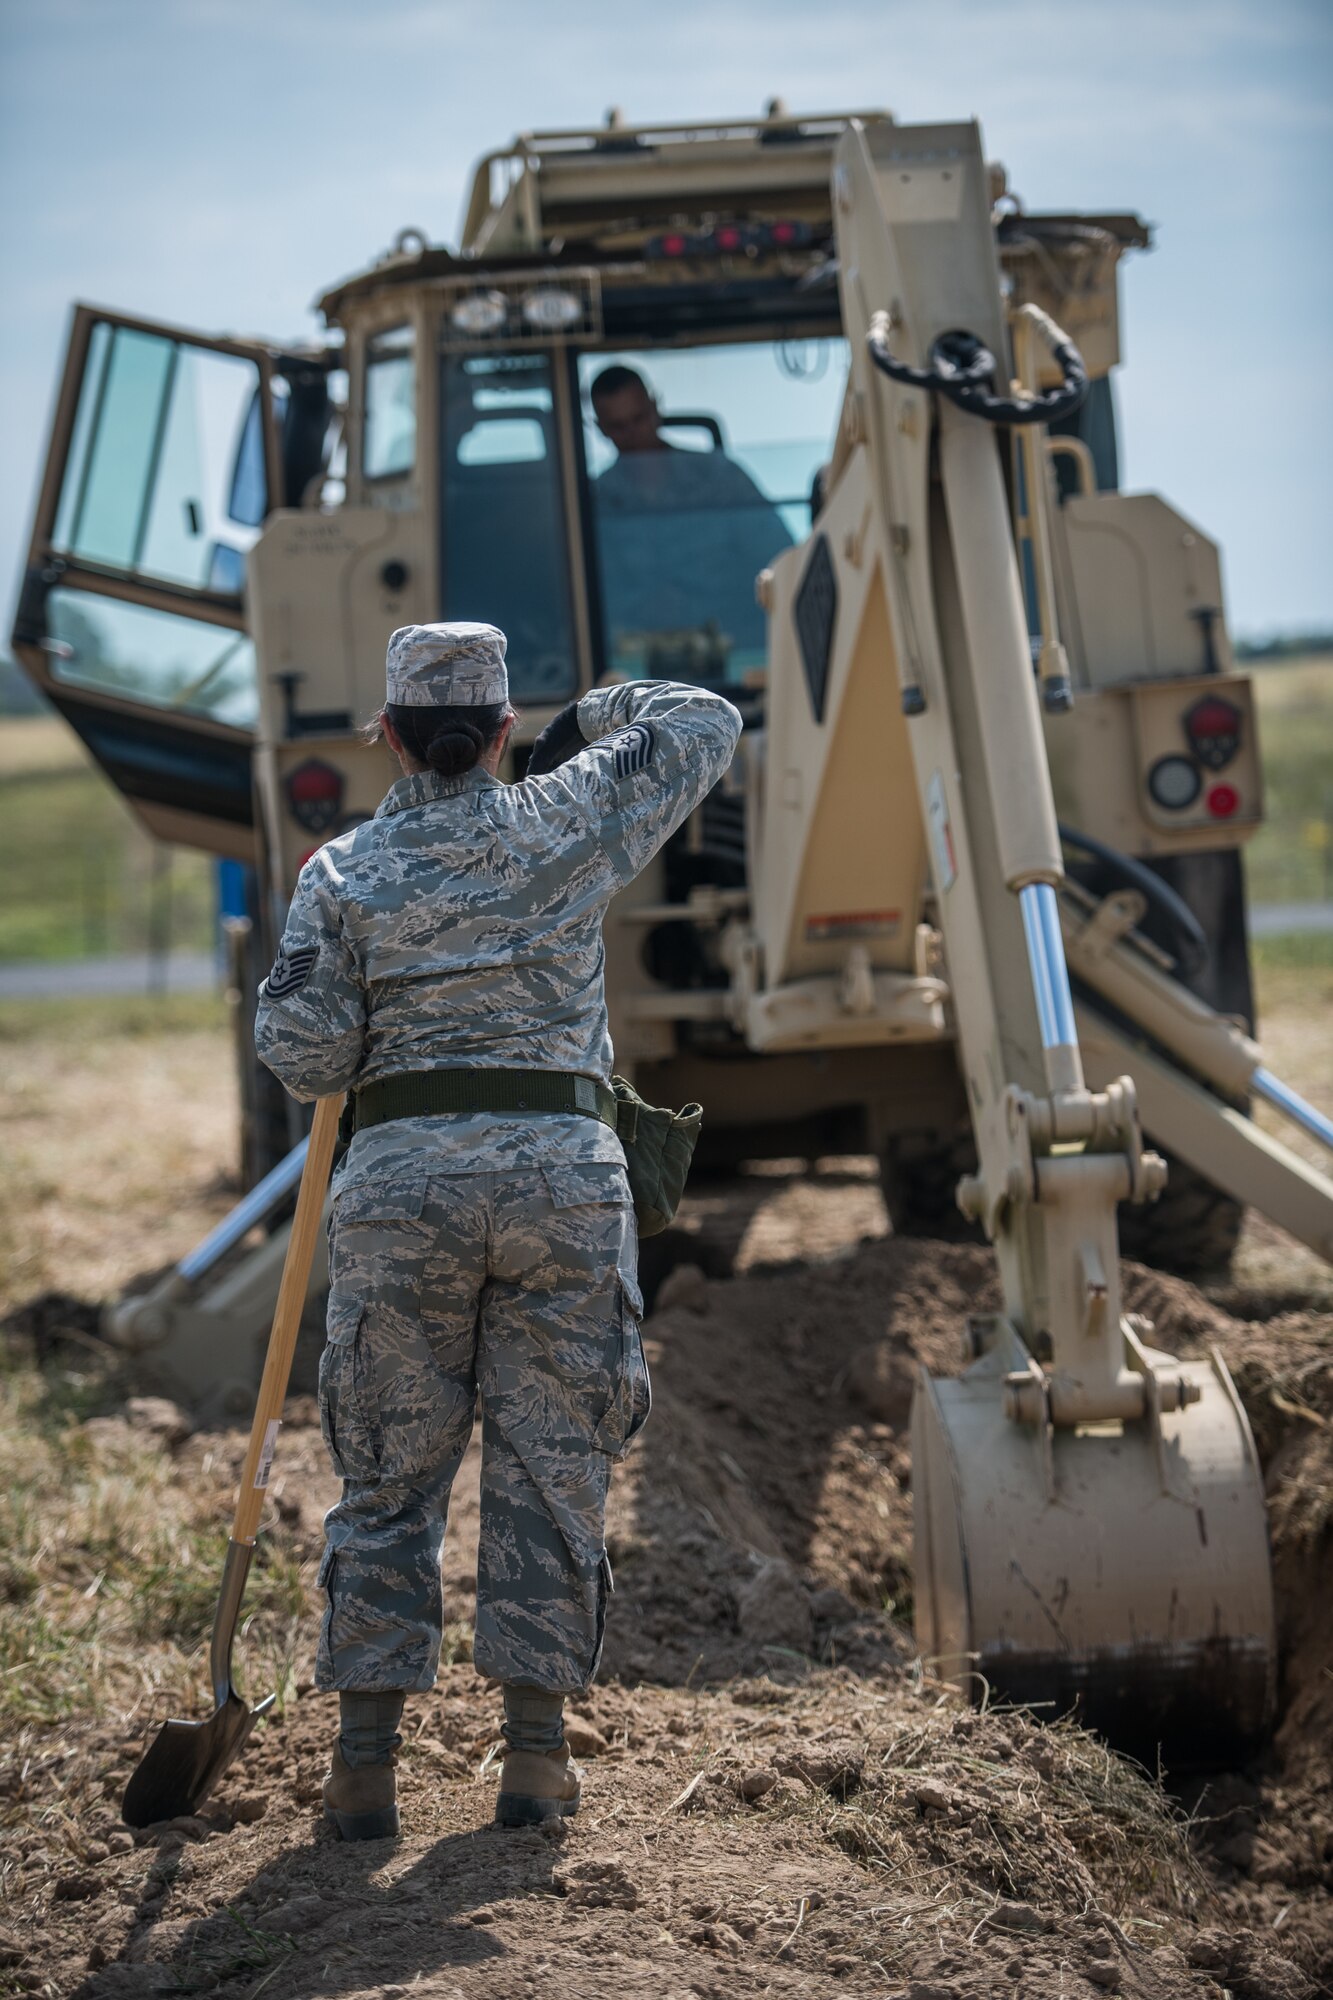 U.S. Air Force Reserve Citizen Airman Tech. Sgt. Tiana Corpuz gives Tech. Sgt. Casey Goodaker, both 932nd Civil Engineer Squadron technicians, instructions on where to dig during field training, Sept. 10, 2019 at the Sparta National Guard training area, Sparta, Illinois. (U.S. Air Force photo by Master Sgt. Christopher Parr)